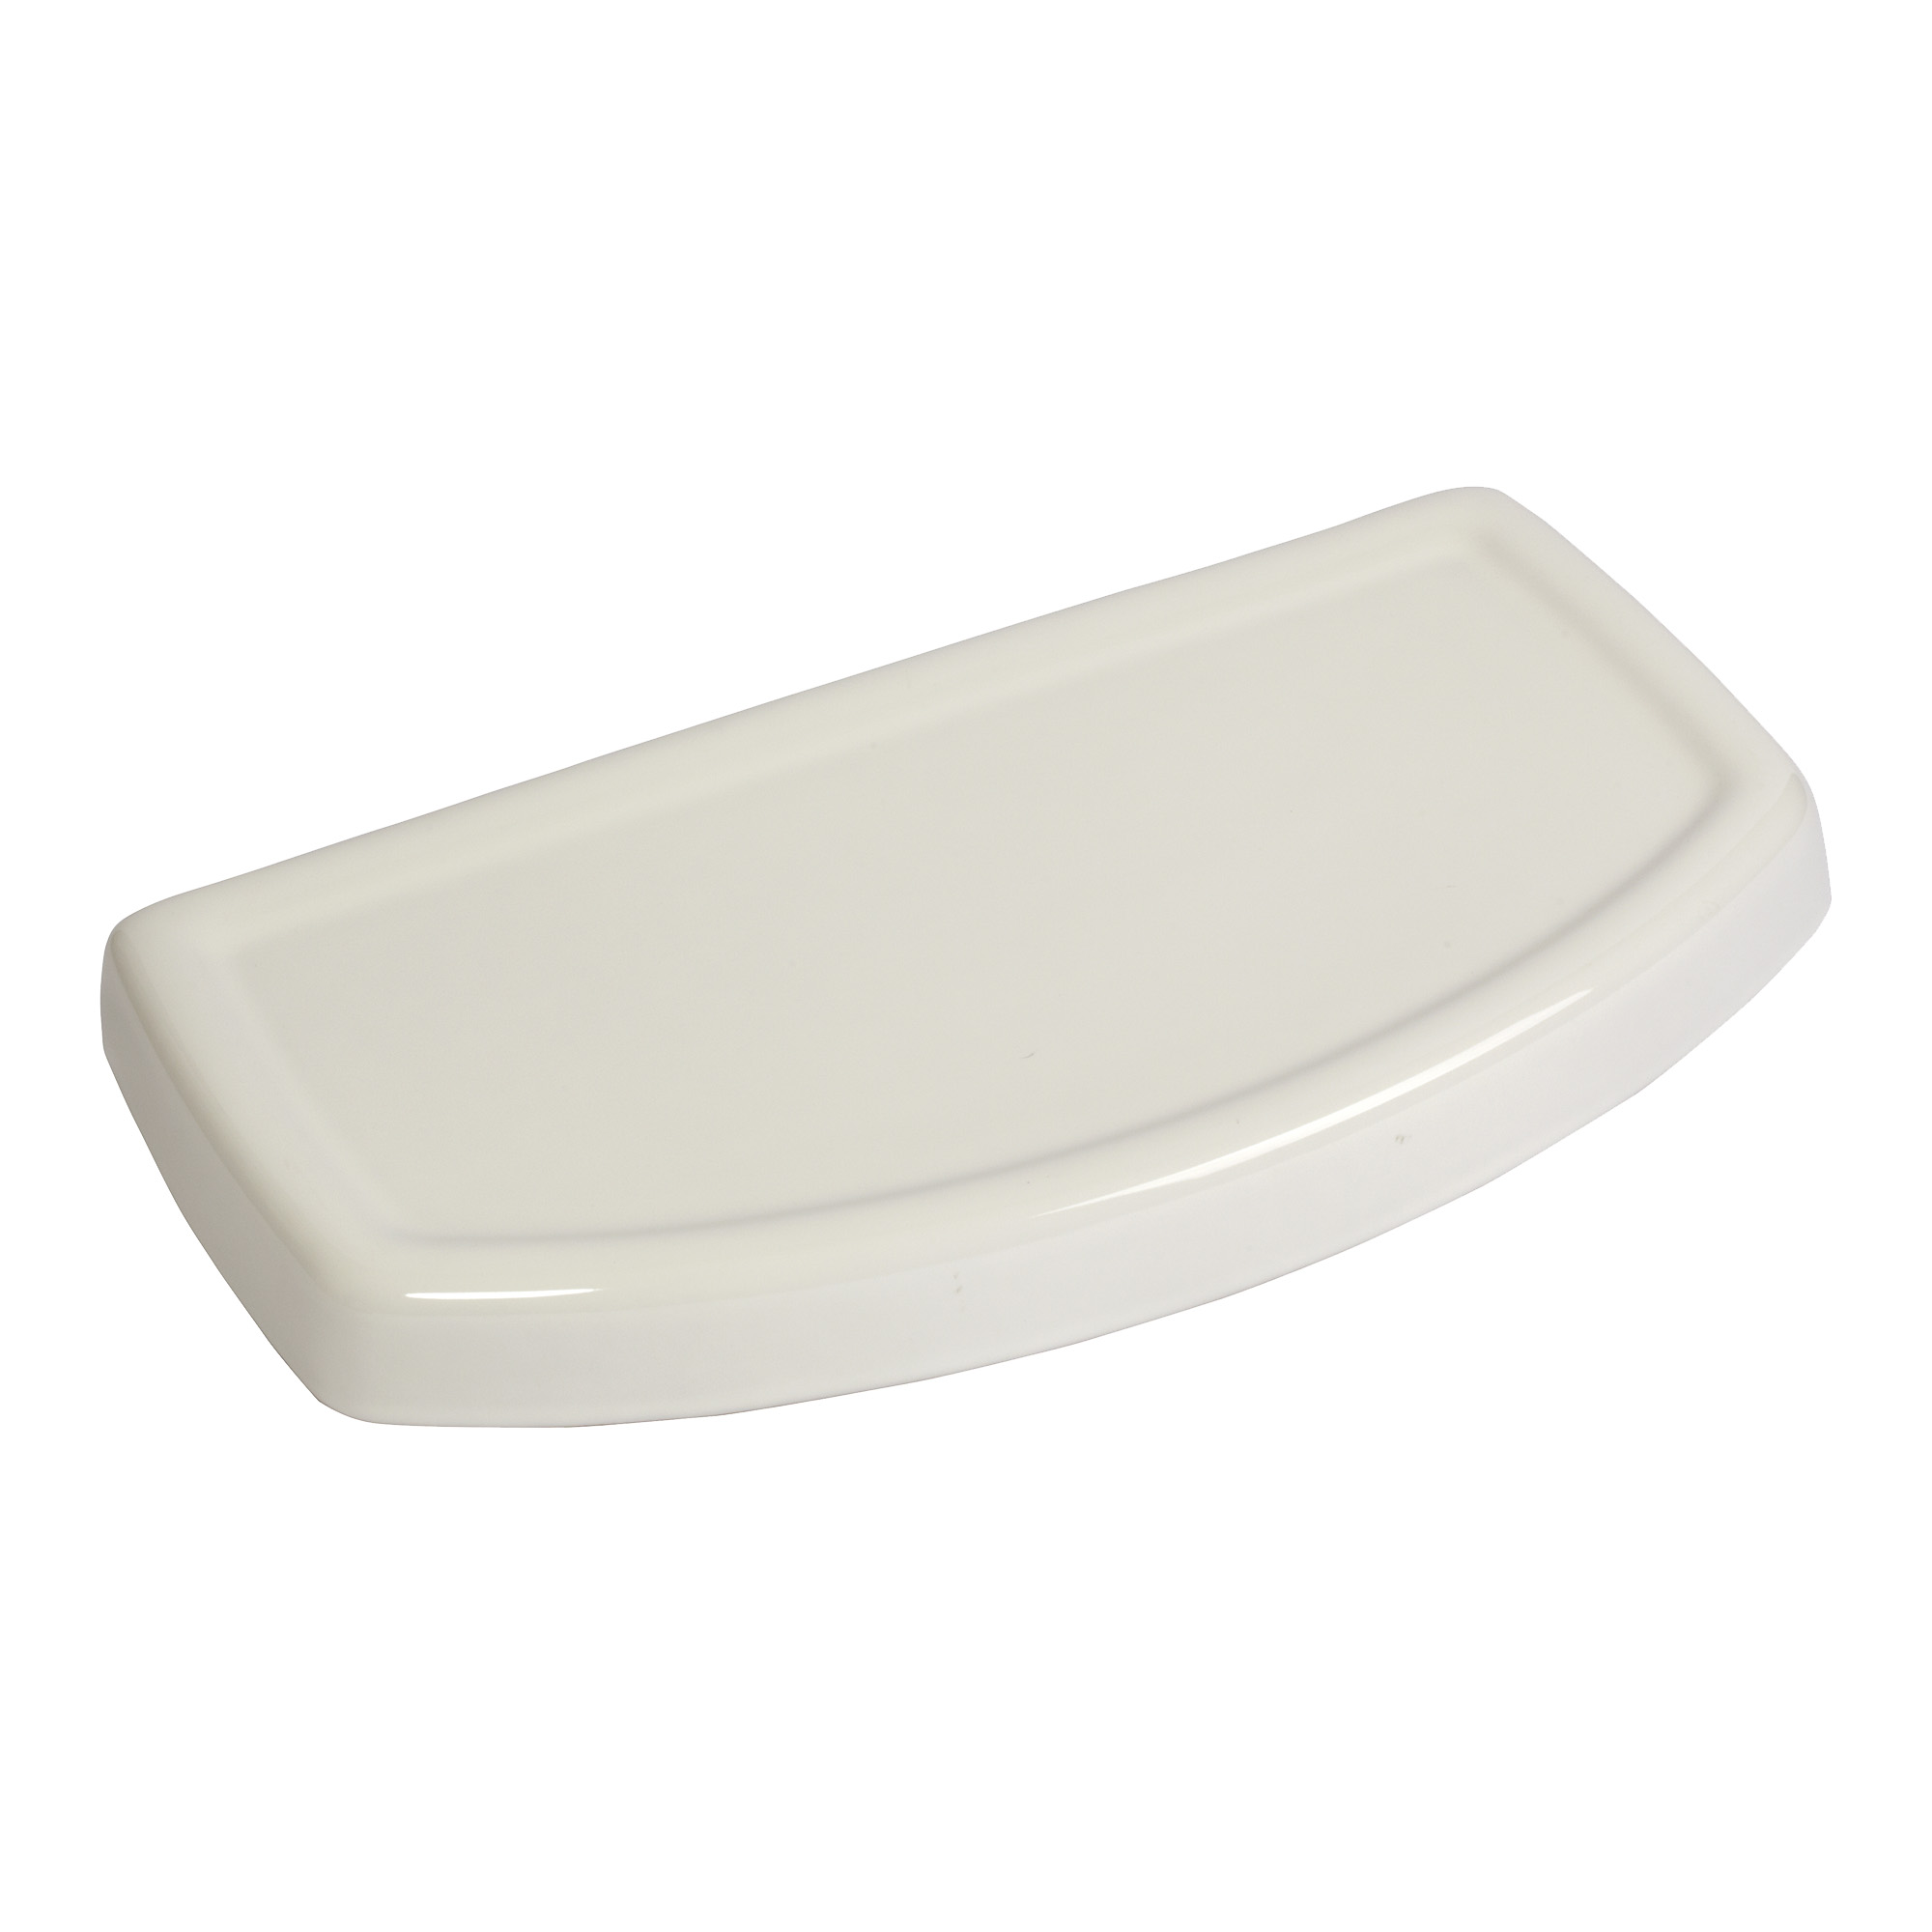 Cadet® 3 FloWise® 12-Inch Rough Toilet Tank Cover